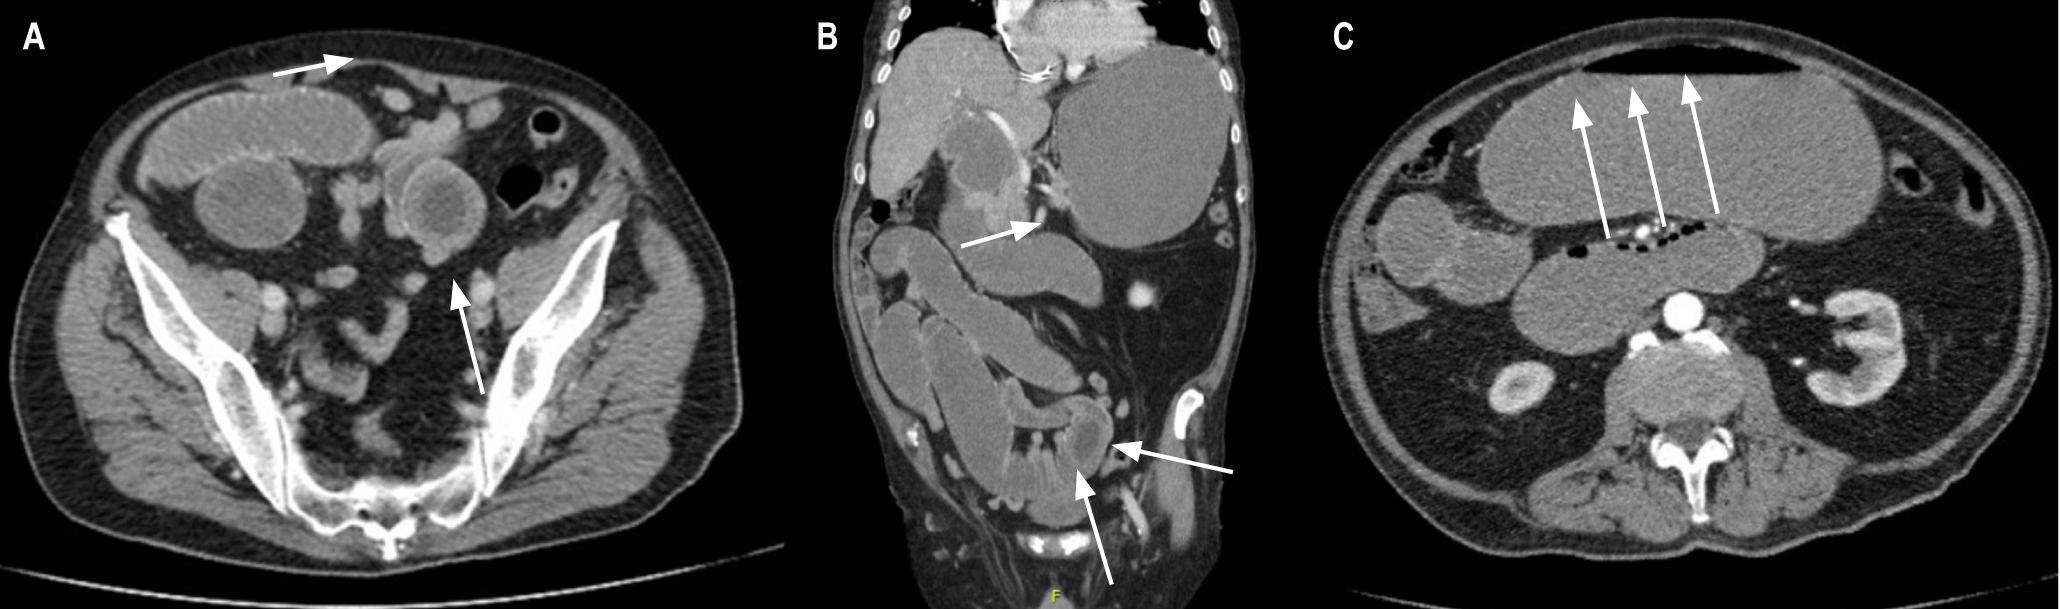 Figure 1. A and B. Target-like image from abdominal tomography suggestive of intestinal obstruction due to intussusception. C. String of pearls-like image suggestive of intestinal obstruction. Images owned by the authors.